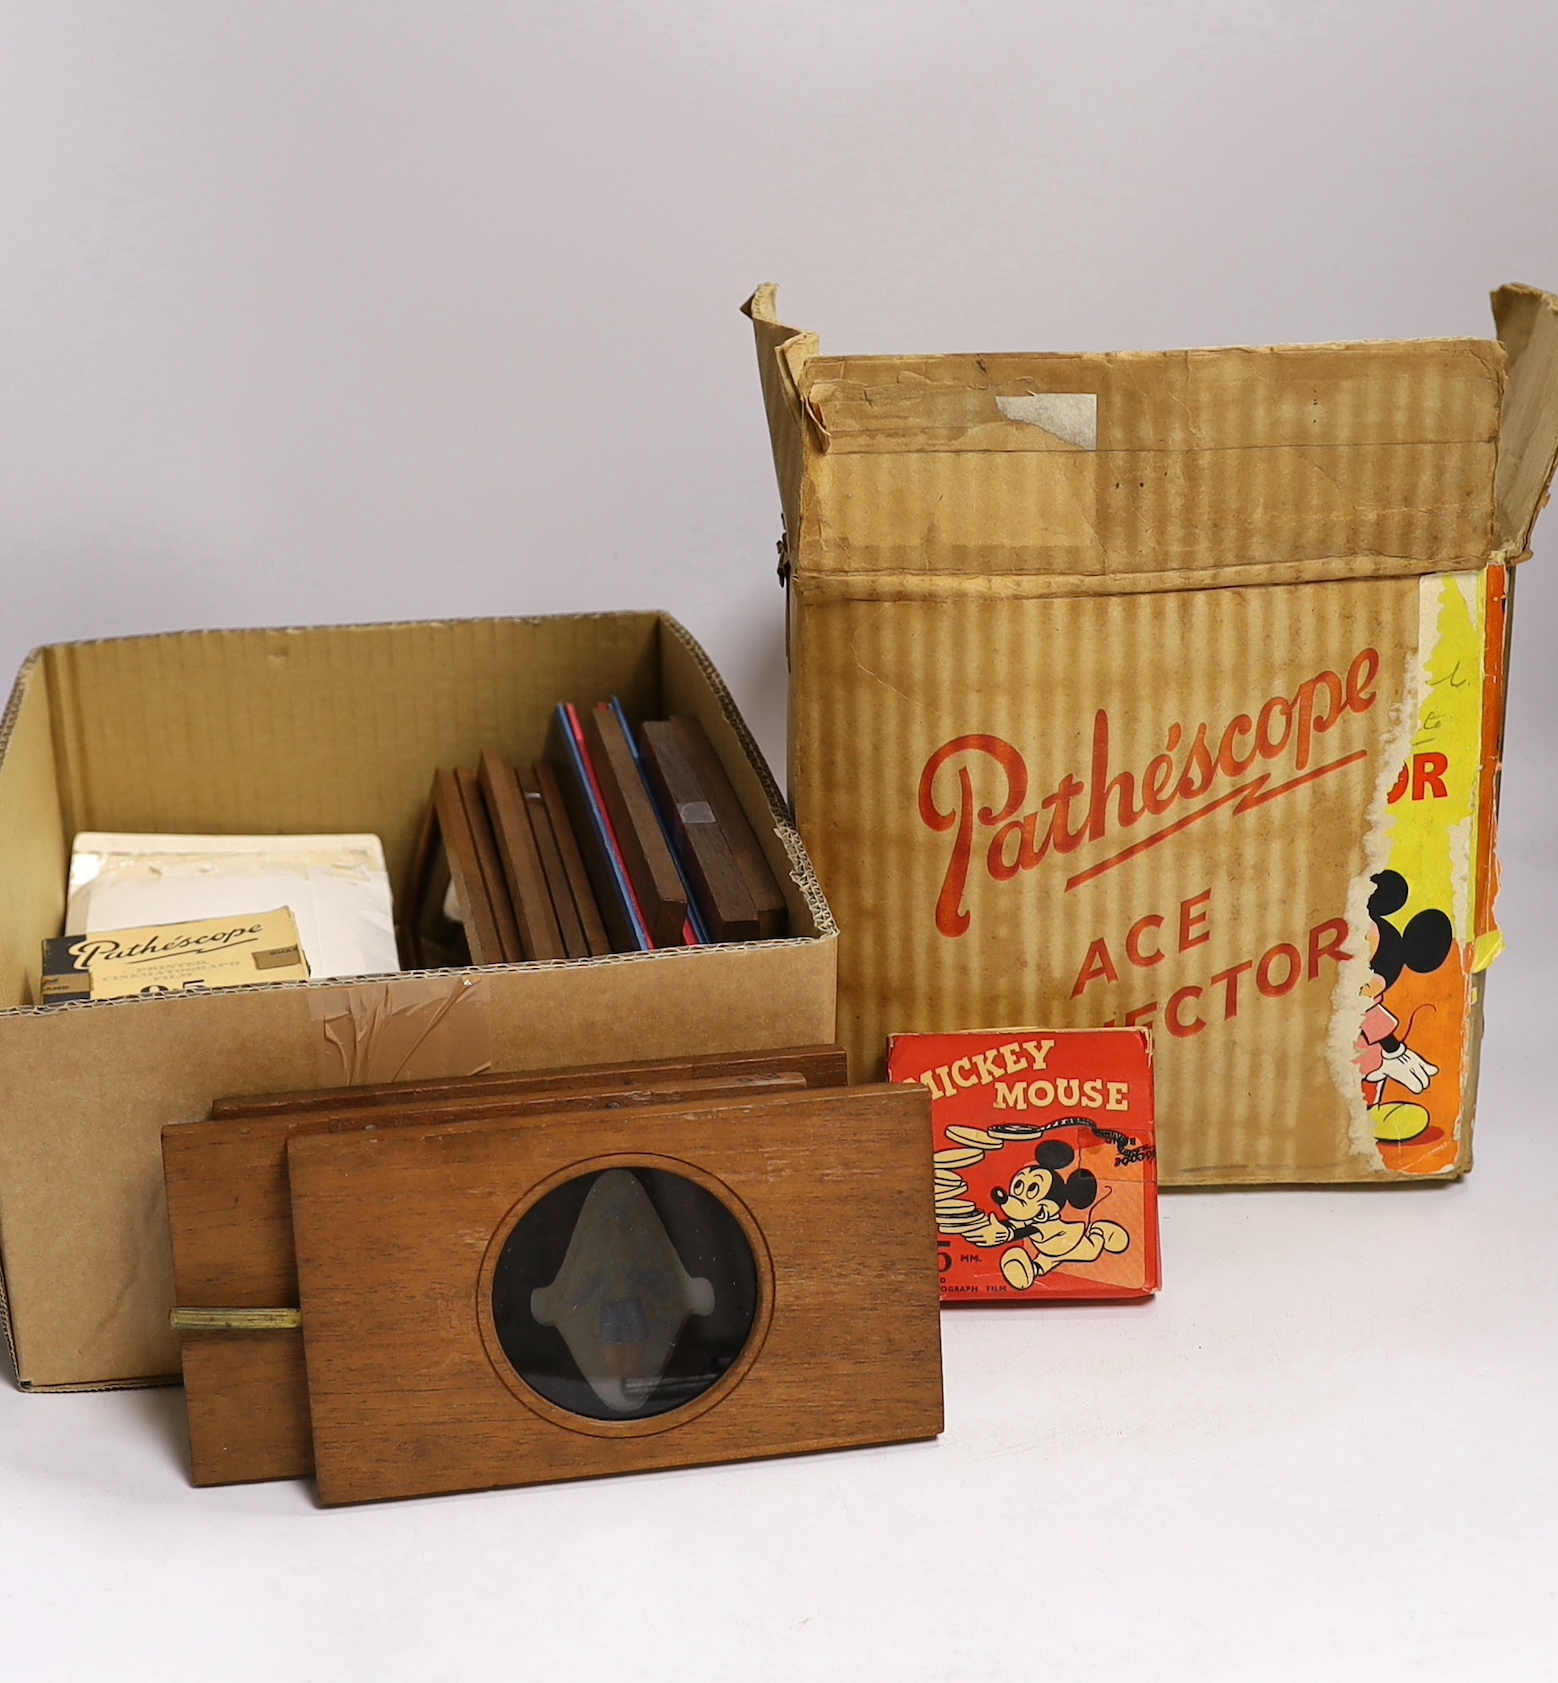 A collection of magic lantern slides, including some painted examples and some in frames, together with a 9.5mm Pathescope Ace Projector with five reels including a Disney Mickey Mouse reel, plus a few early 20th century